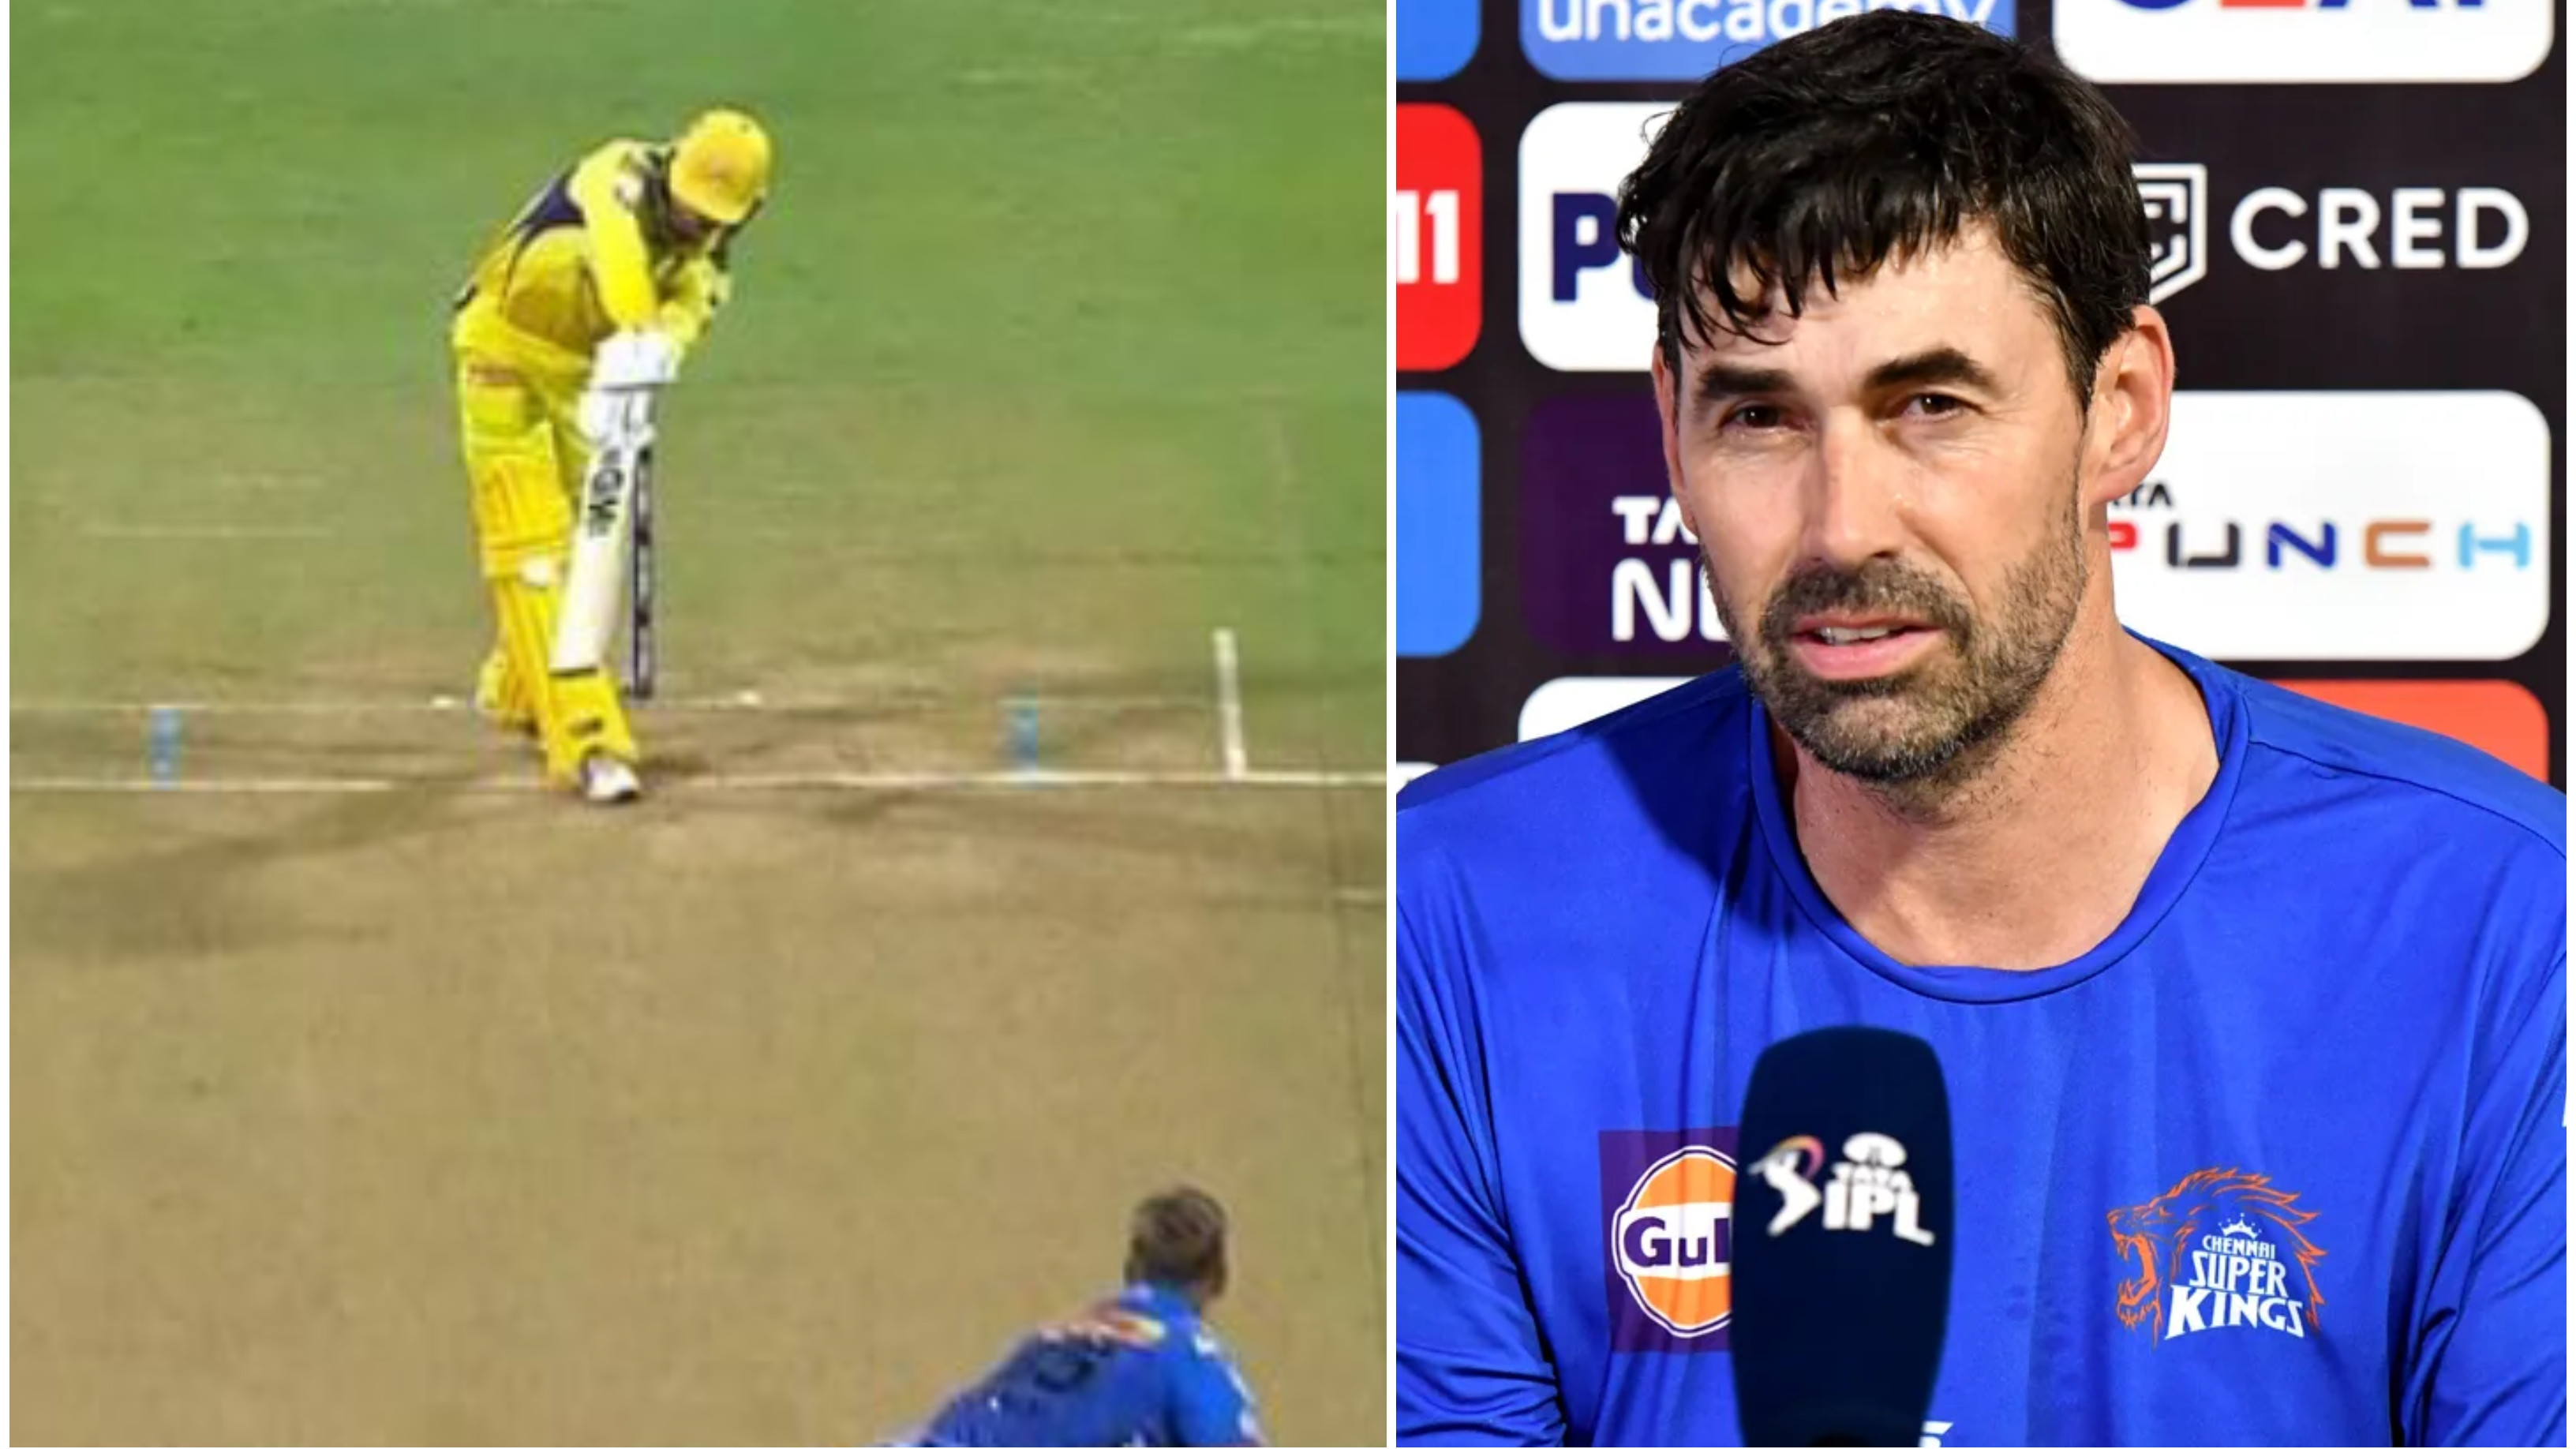 IPL 2022: “It was a little bit unlucky”, Fleming says absence of DRS set off a chain of events that went against CSK